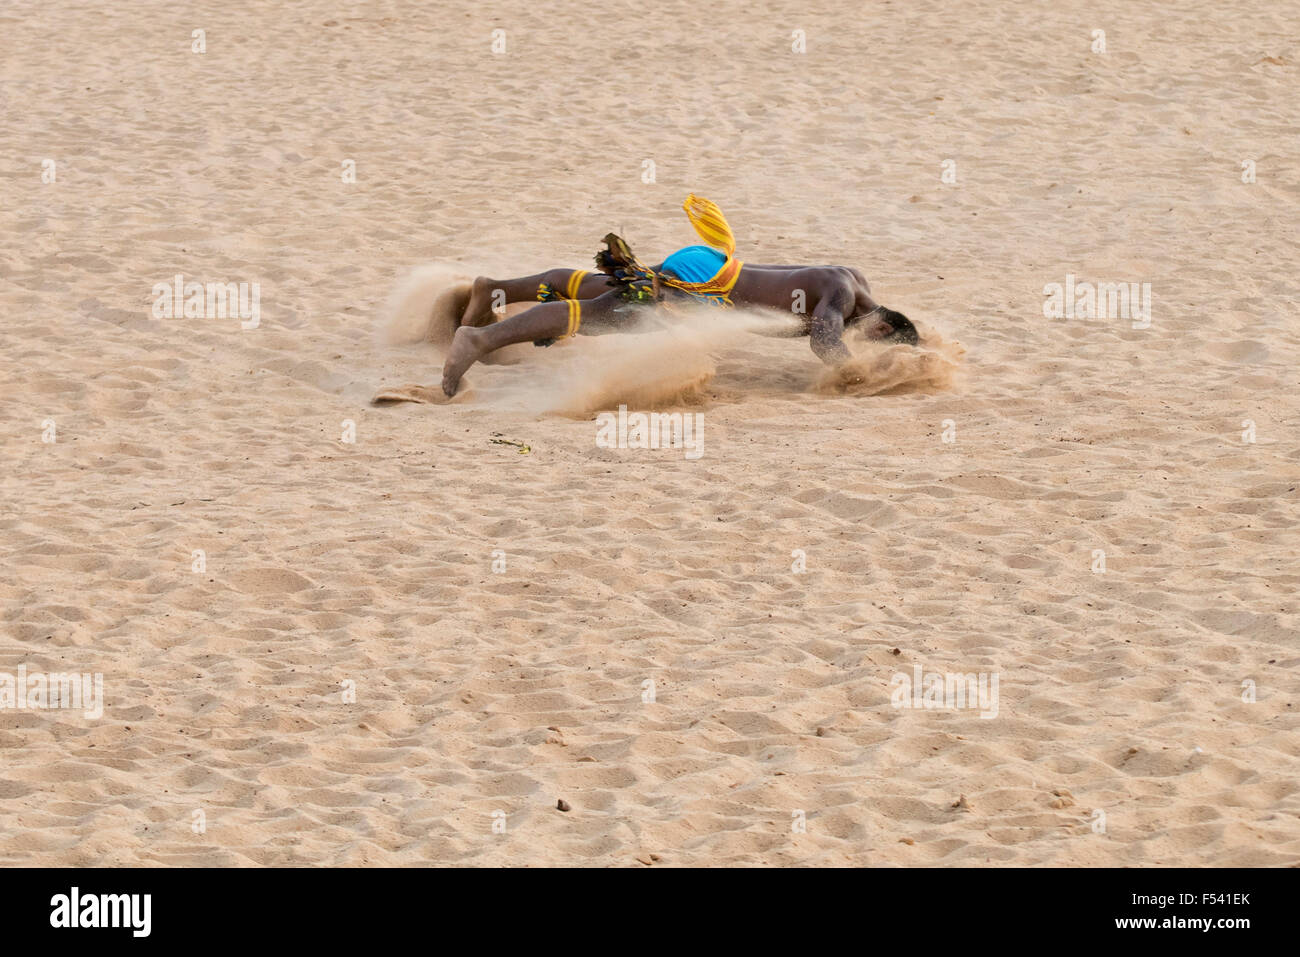 Palmas, Brazil. 26th Oct, 2015. Pareci warriors demonstrate their traditional sport, during which they can only touch the ball with their heads, during the International Indigenous Games, in the city of Palmas, Tocantins State, Brazil. Credit:  Sue Cunningham Photographic/Alamy Live News Stock Photo